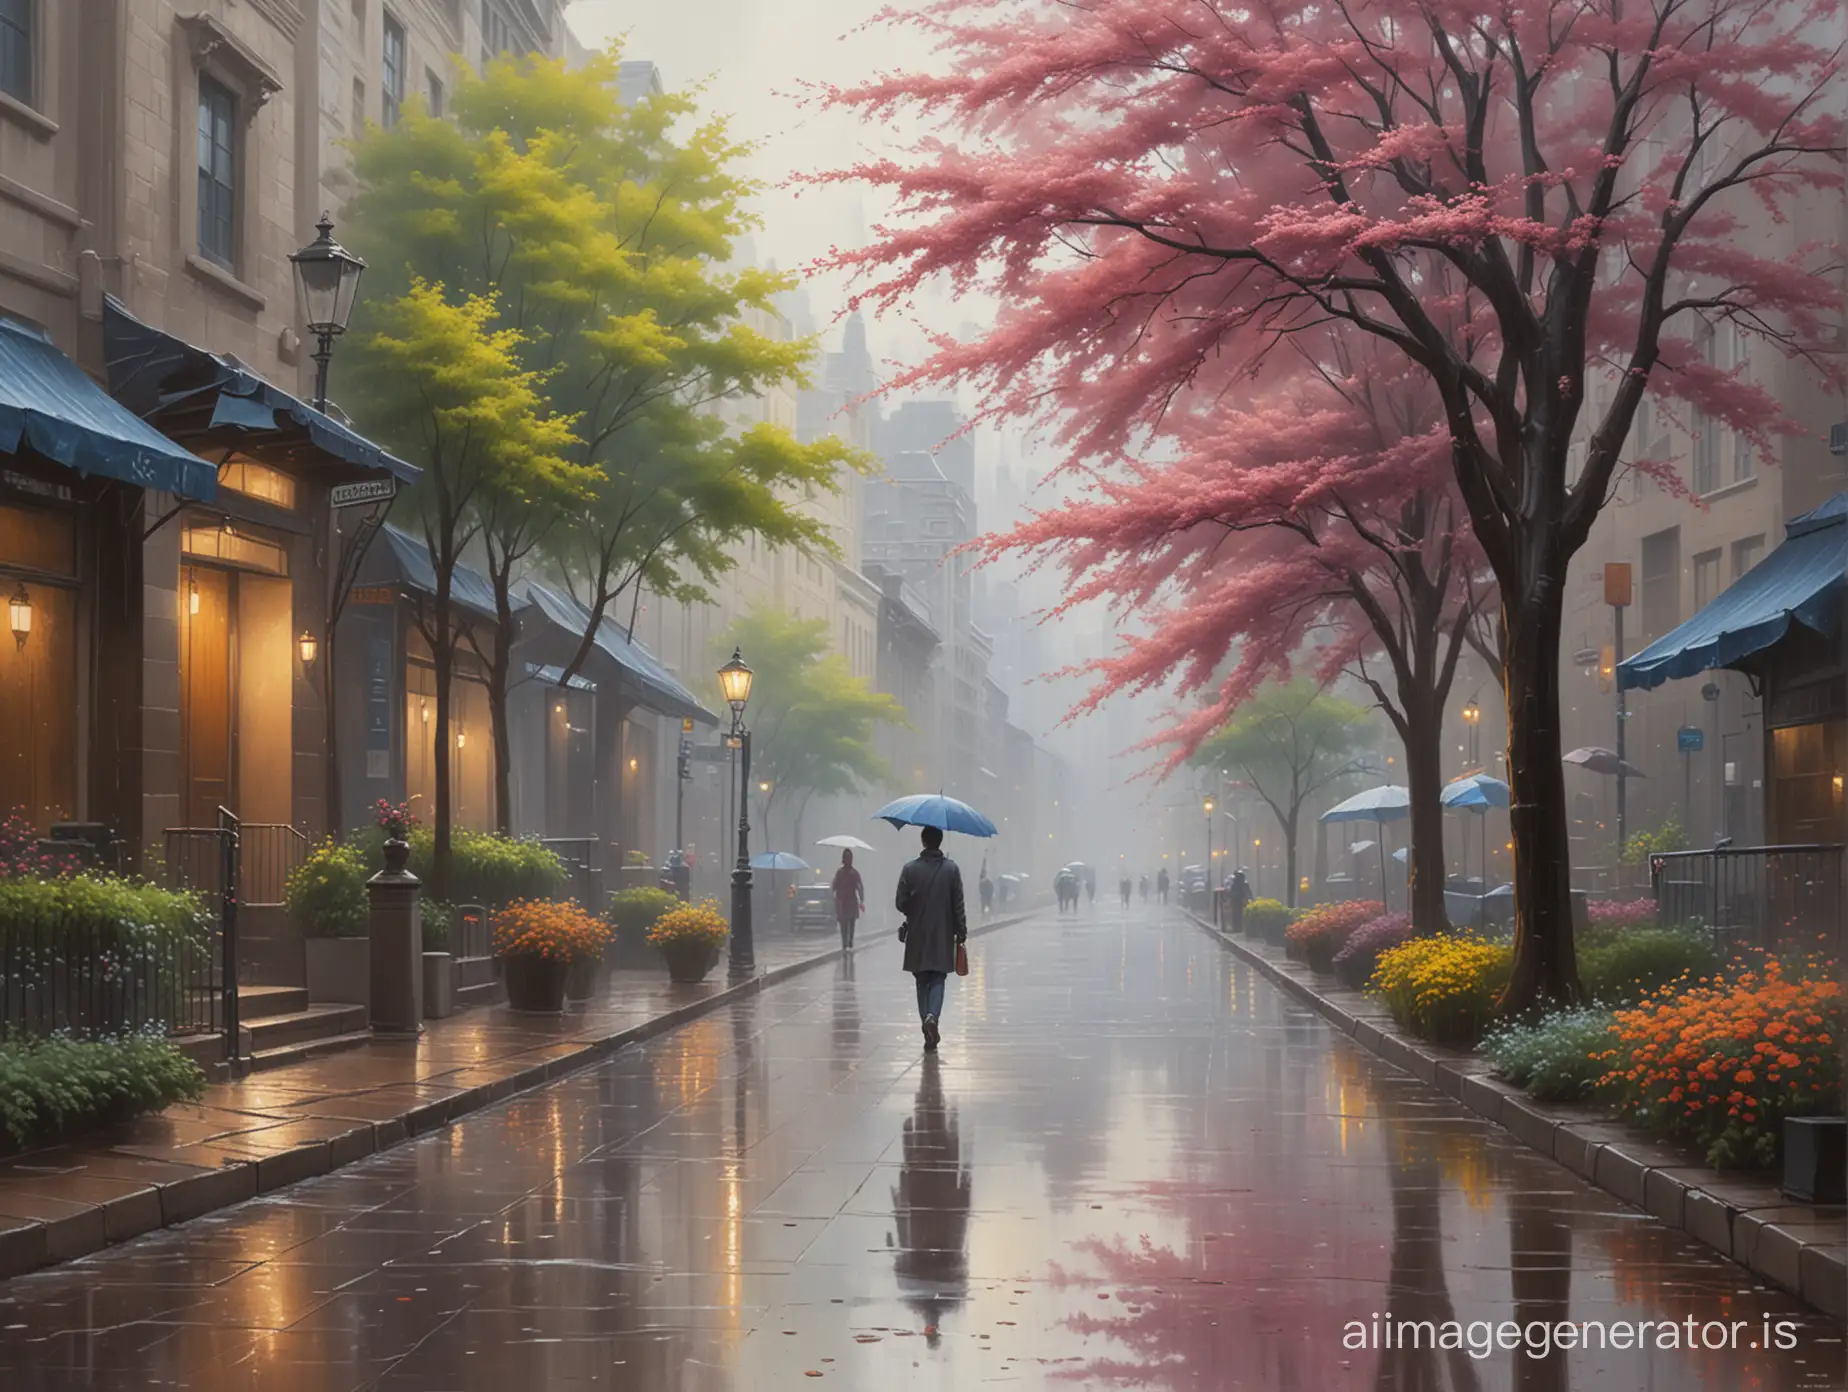 Strolling-in-the-Rain-A-Fantasy-Art-Canvas-of-Blossoms-and-Serenity